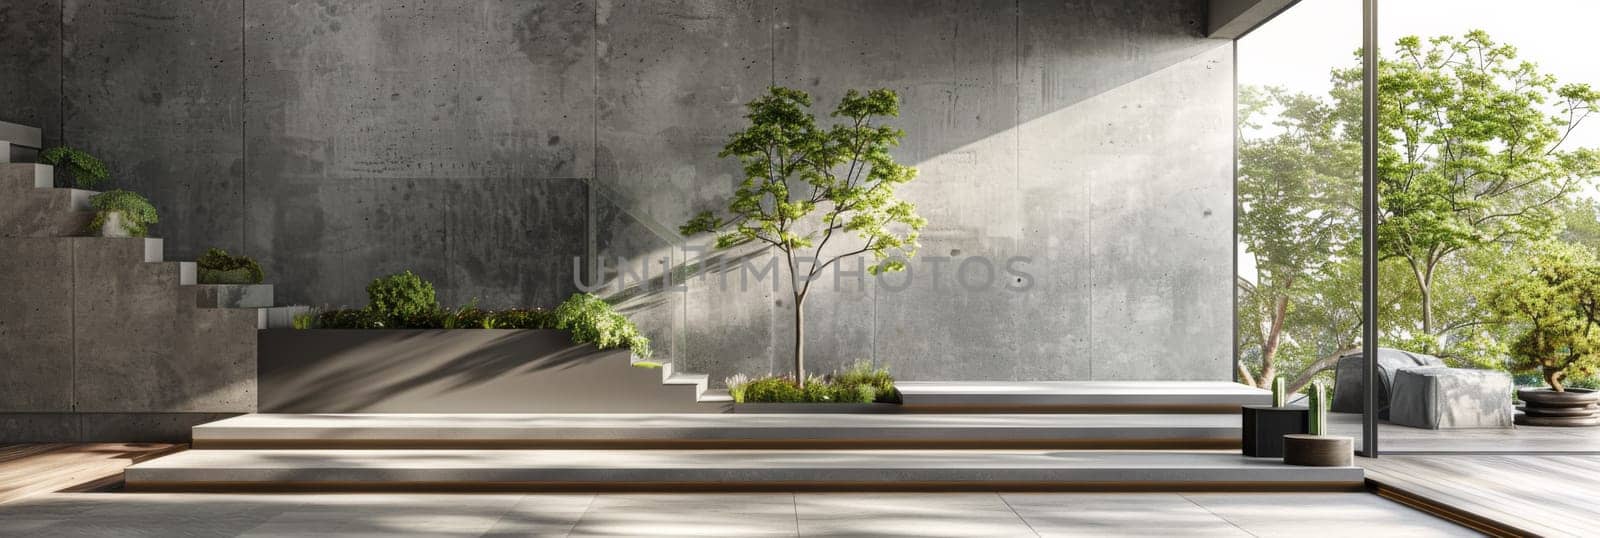 A concrete steps leading up to a large window with plants, AI by starush